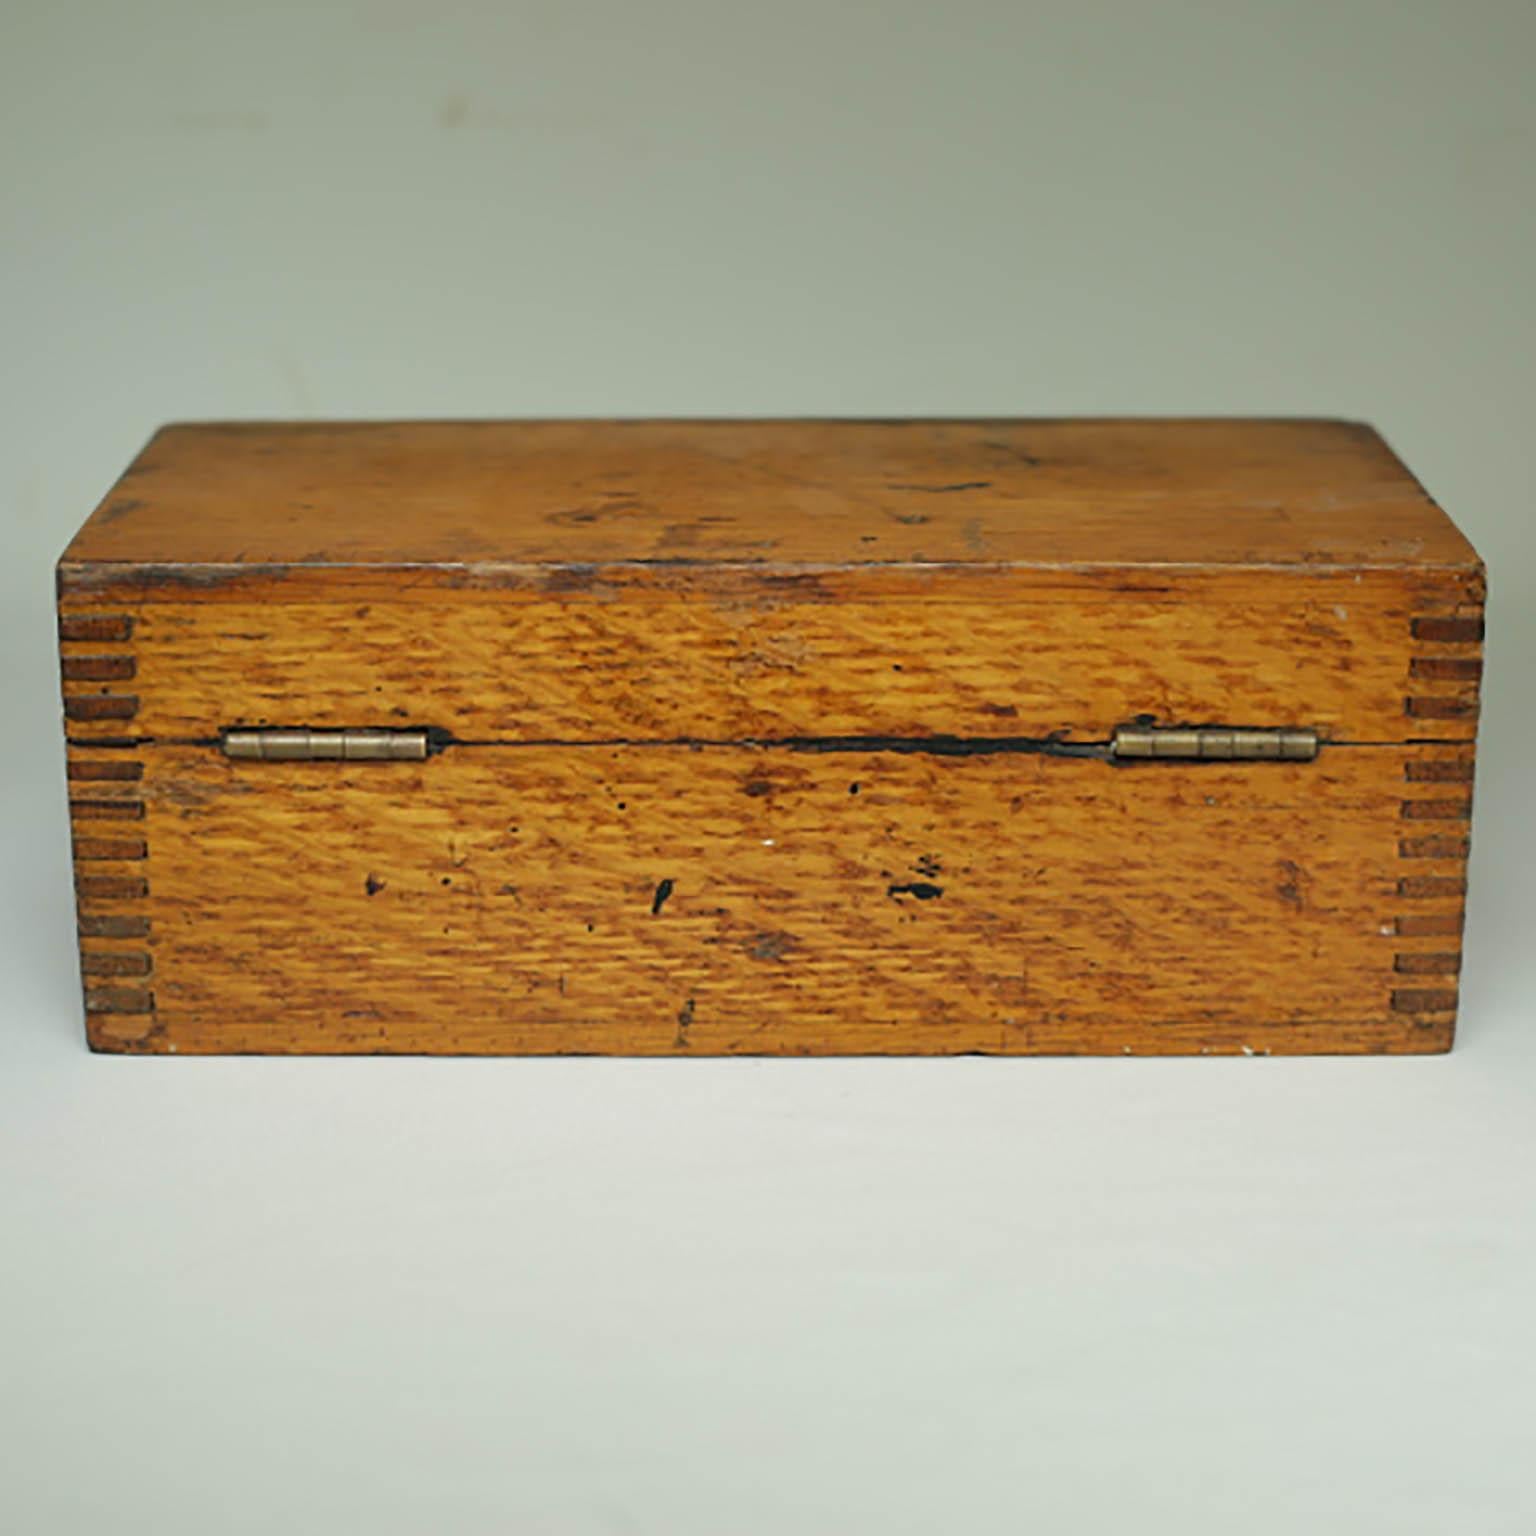 19th Century Vintage Wooden Box with Dovetails Joints, circa 1880s-1920s